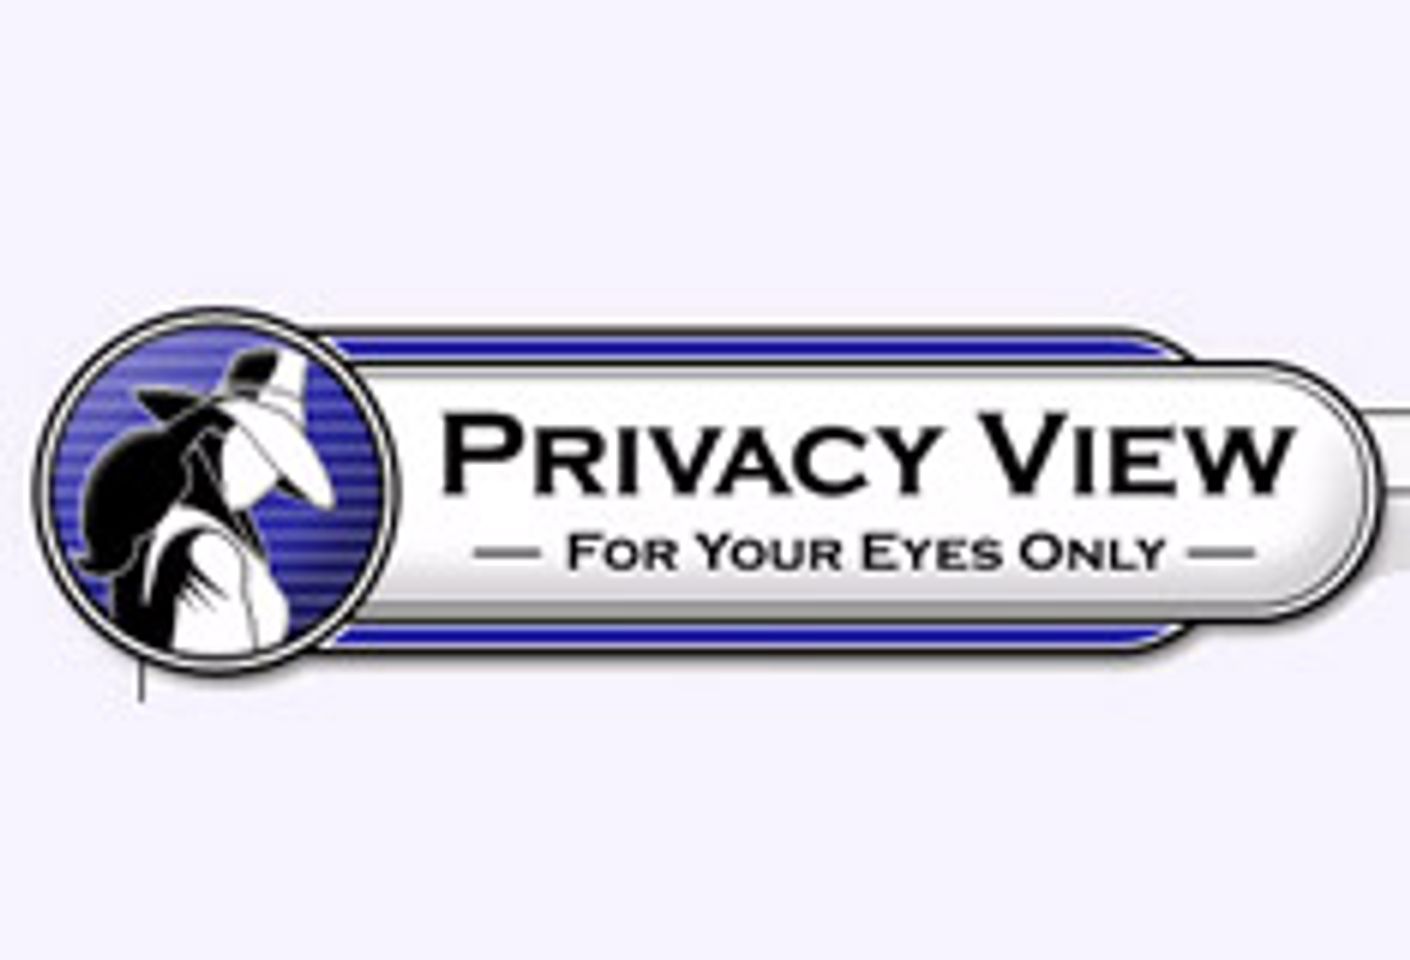 PrivacyView Software Offers Web Surfing Safety